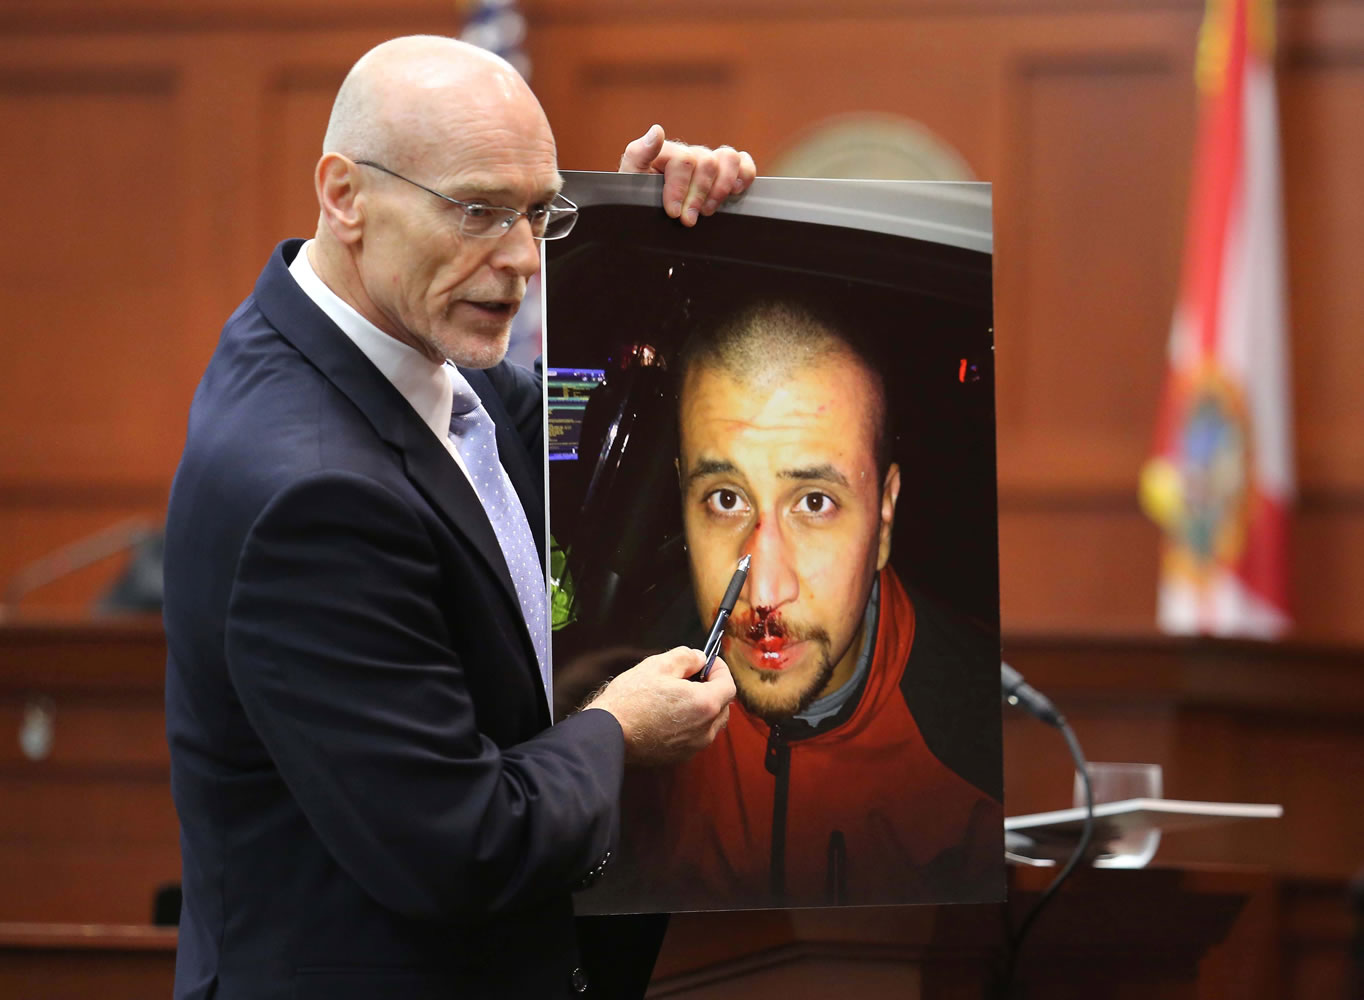 Don West, a defense attorney for George Zimmerman, displays a photo of his client from the night of the shooting of Trayvon Martin, to the jury during opening statements in Zimmerman's trial, in Seminole circuit court in Sanford, Fla., on Monday.